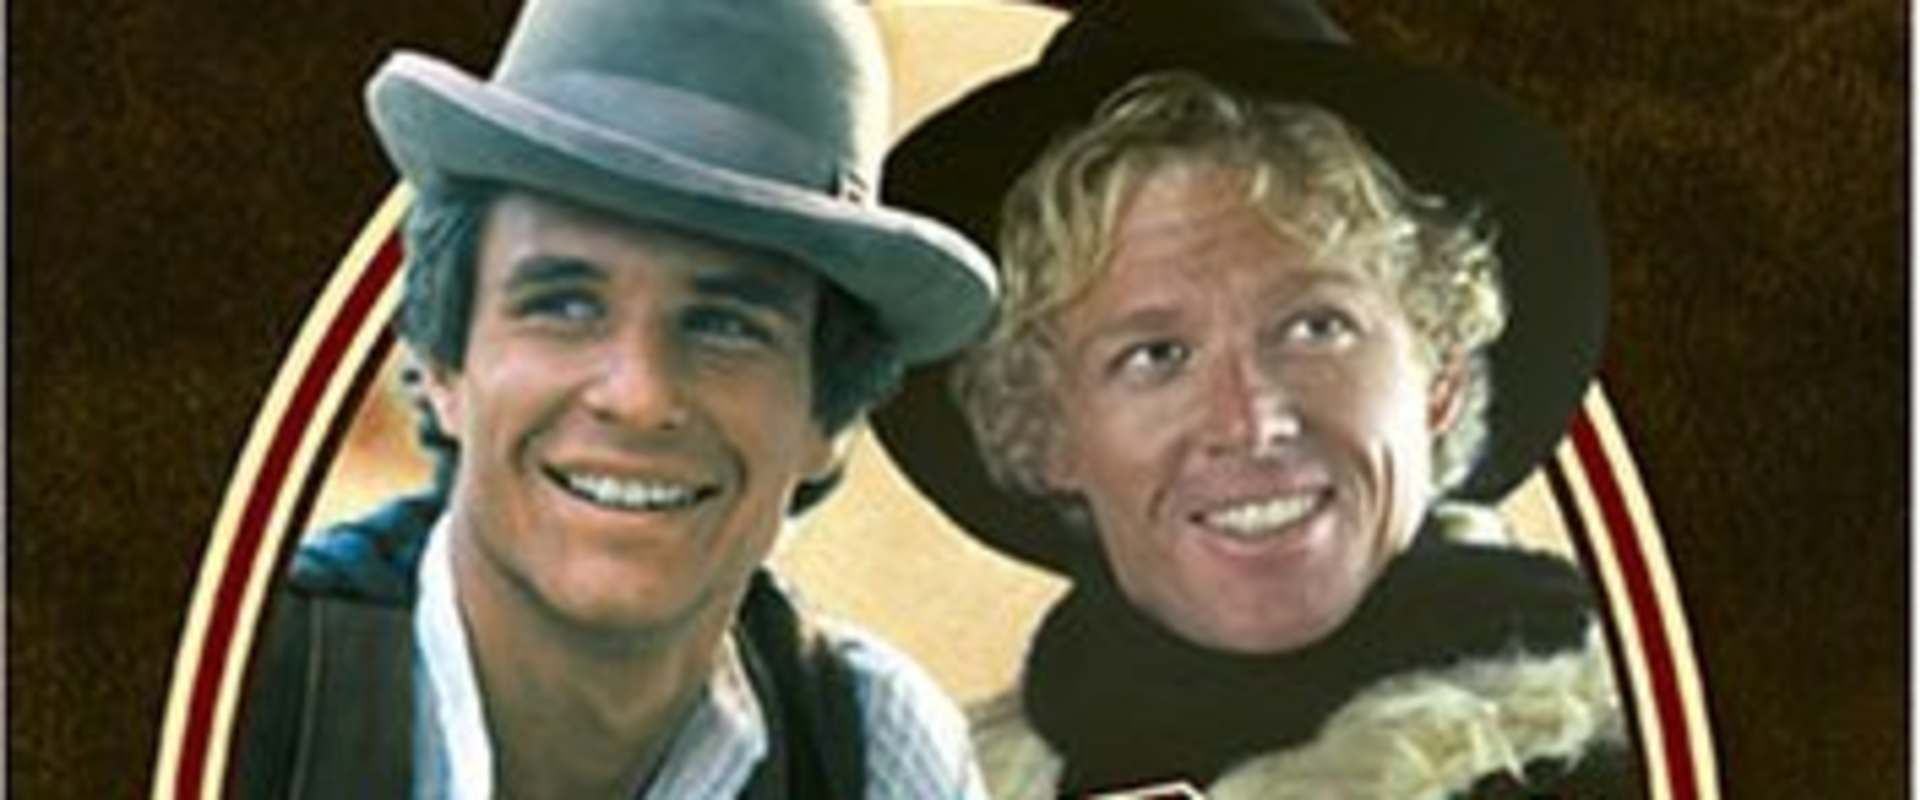 Butch and Sundance: The Early Days background 1